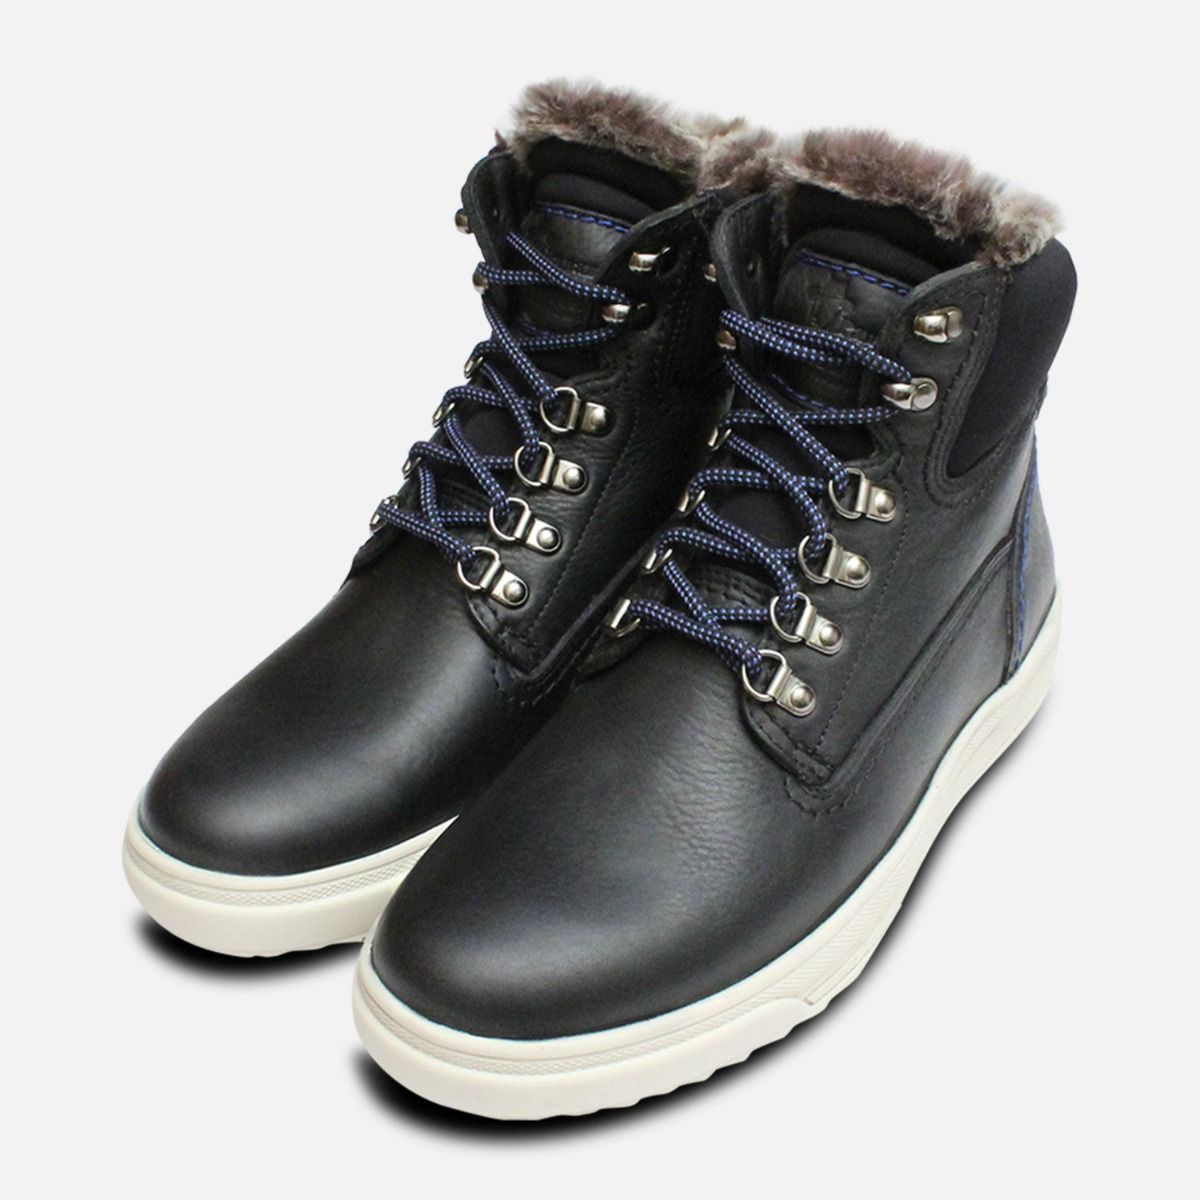 boots with fur inside mens